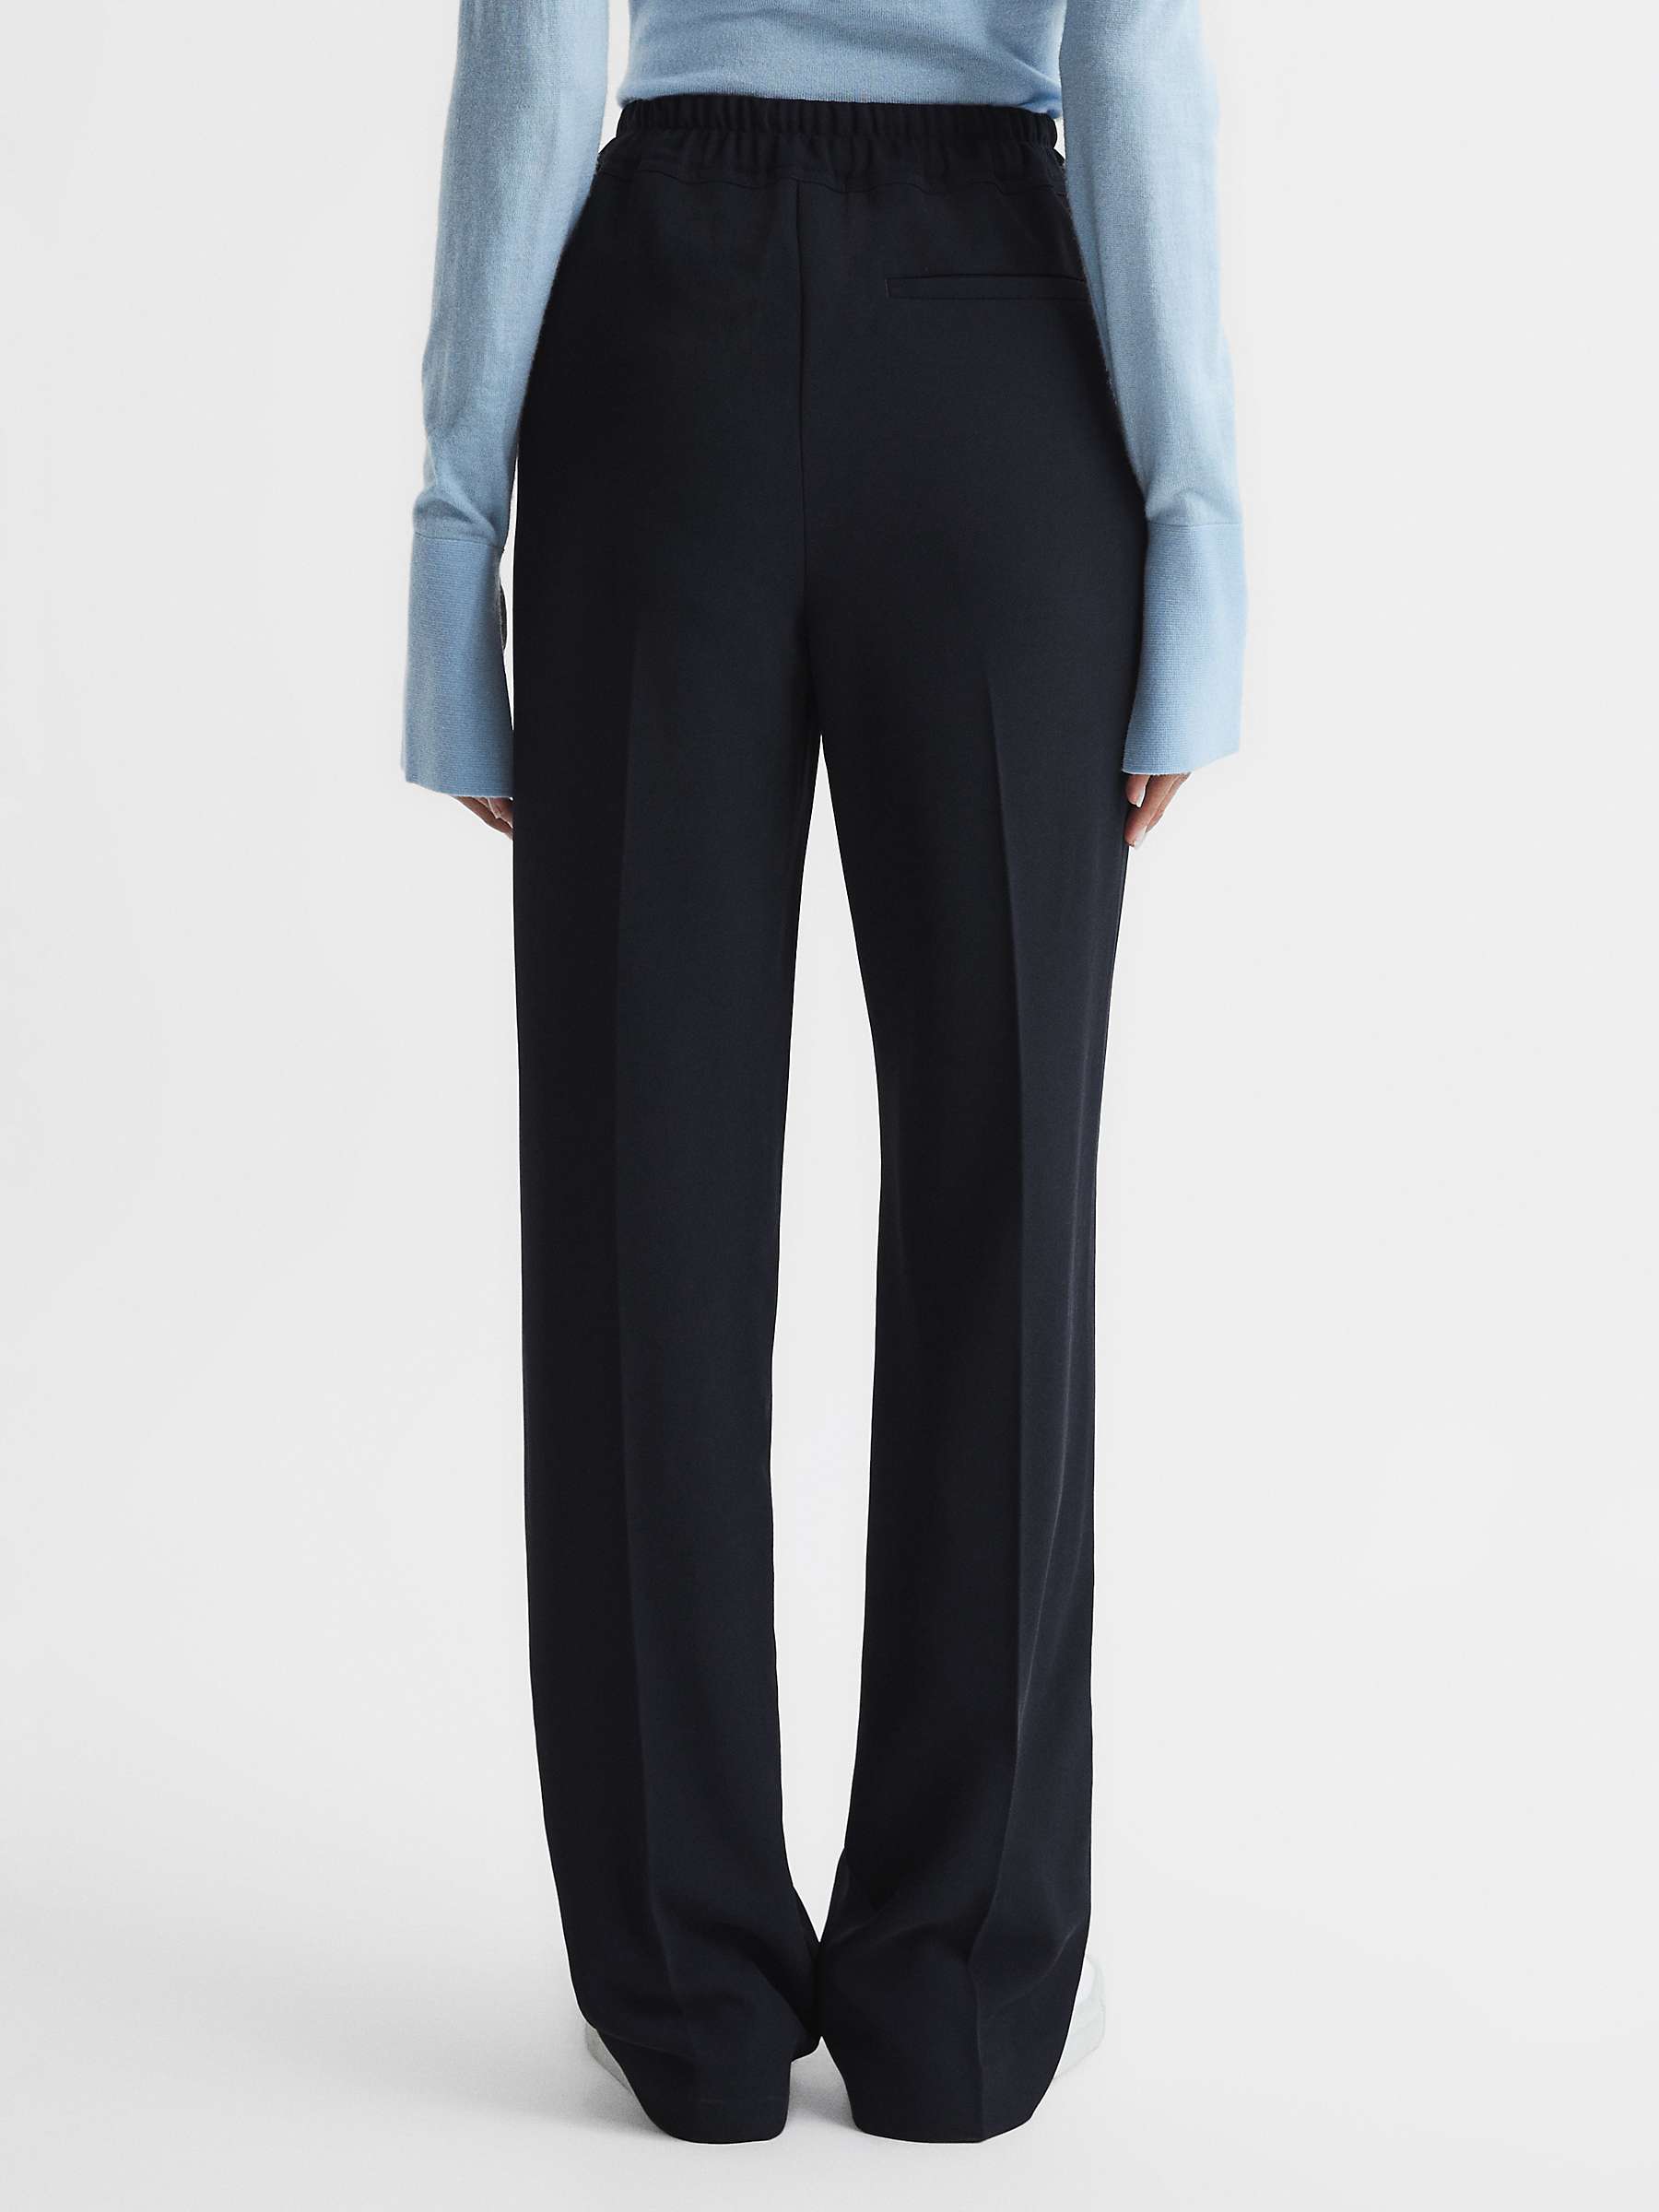 Reiss Hailey Wide Leg Pull On Trousers, Navy at John Lewis & Partners